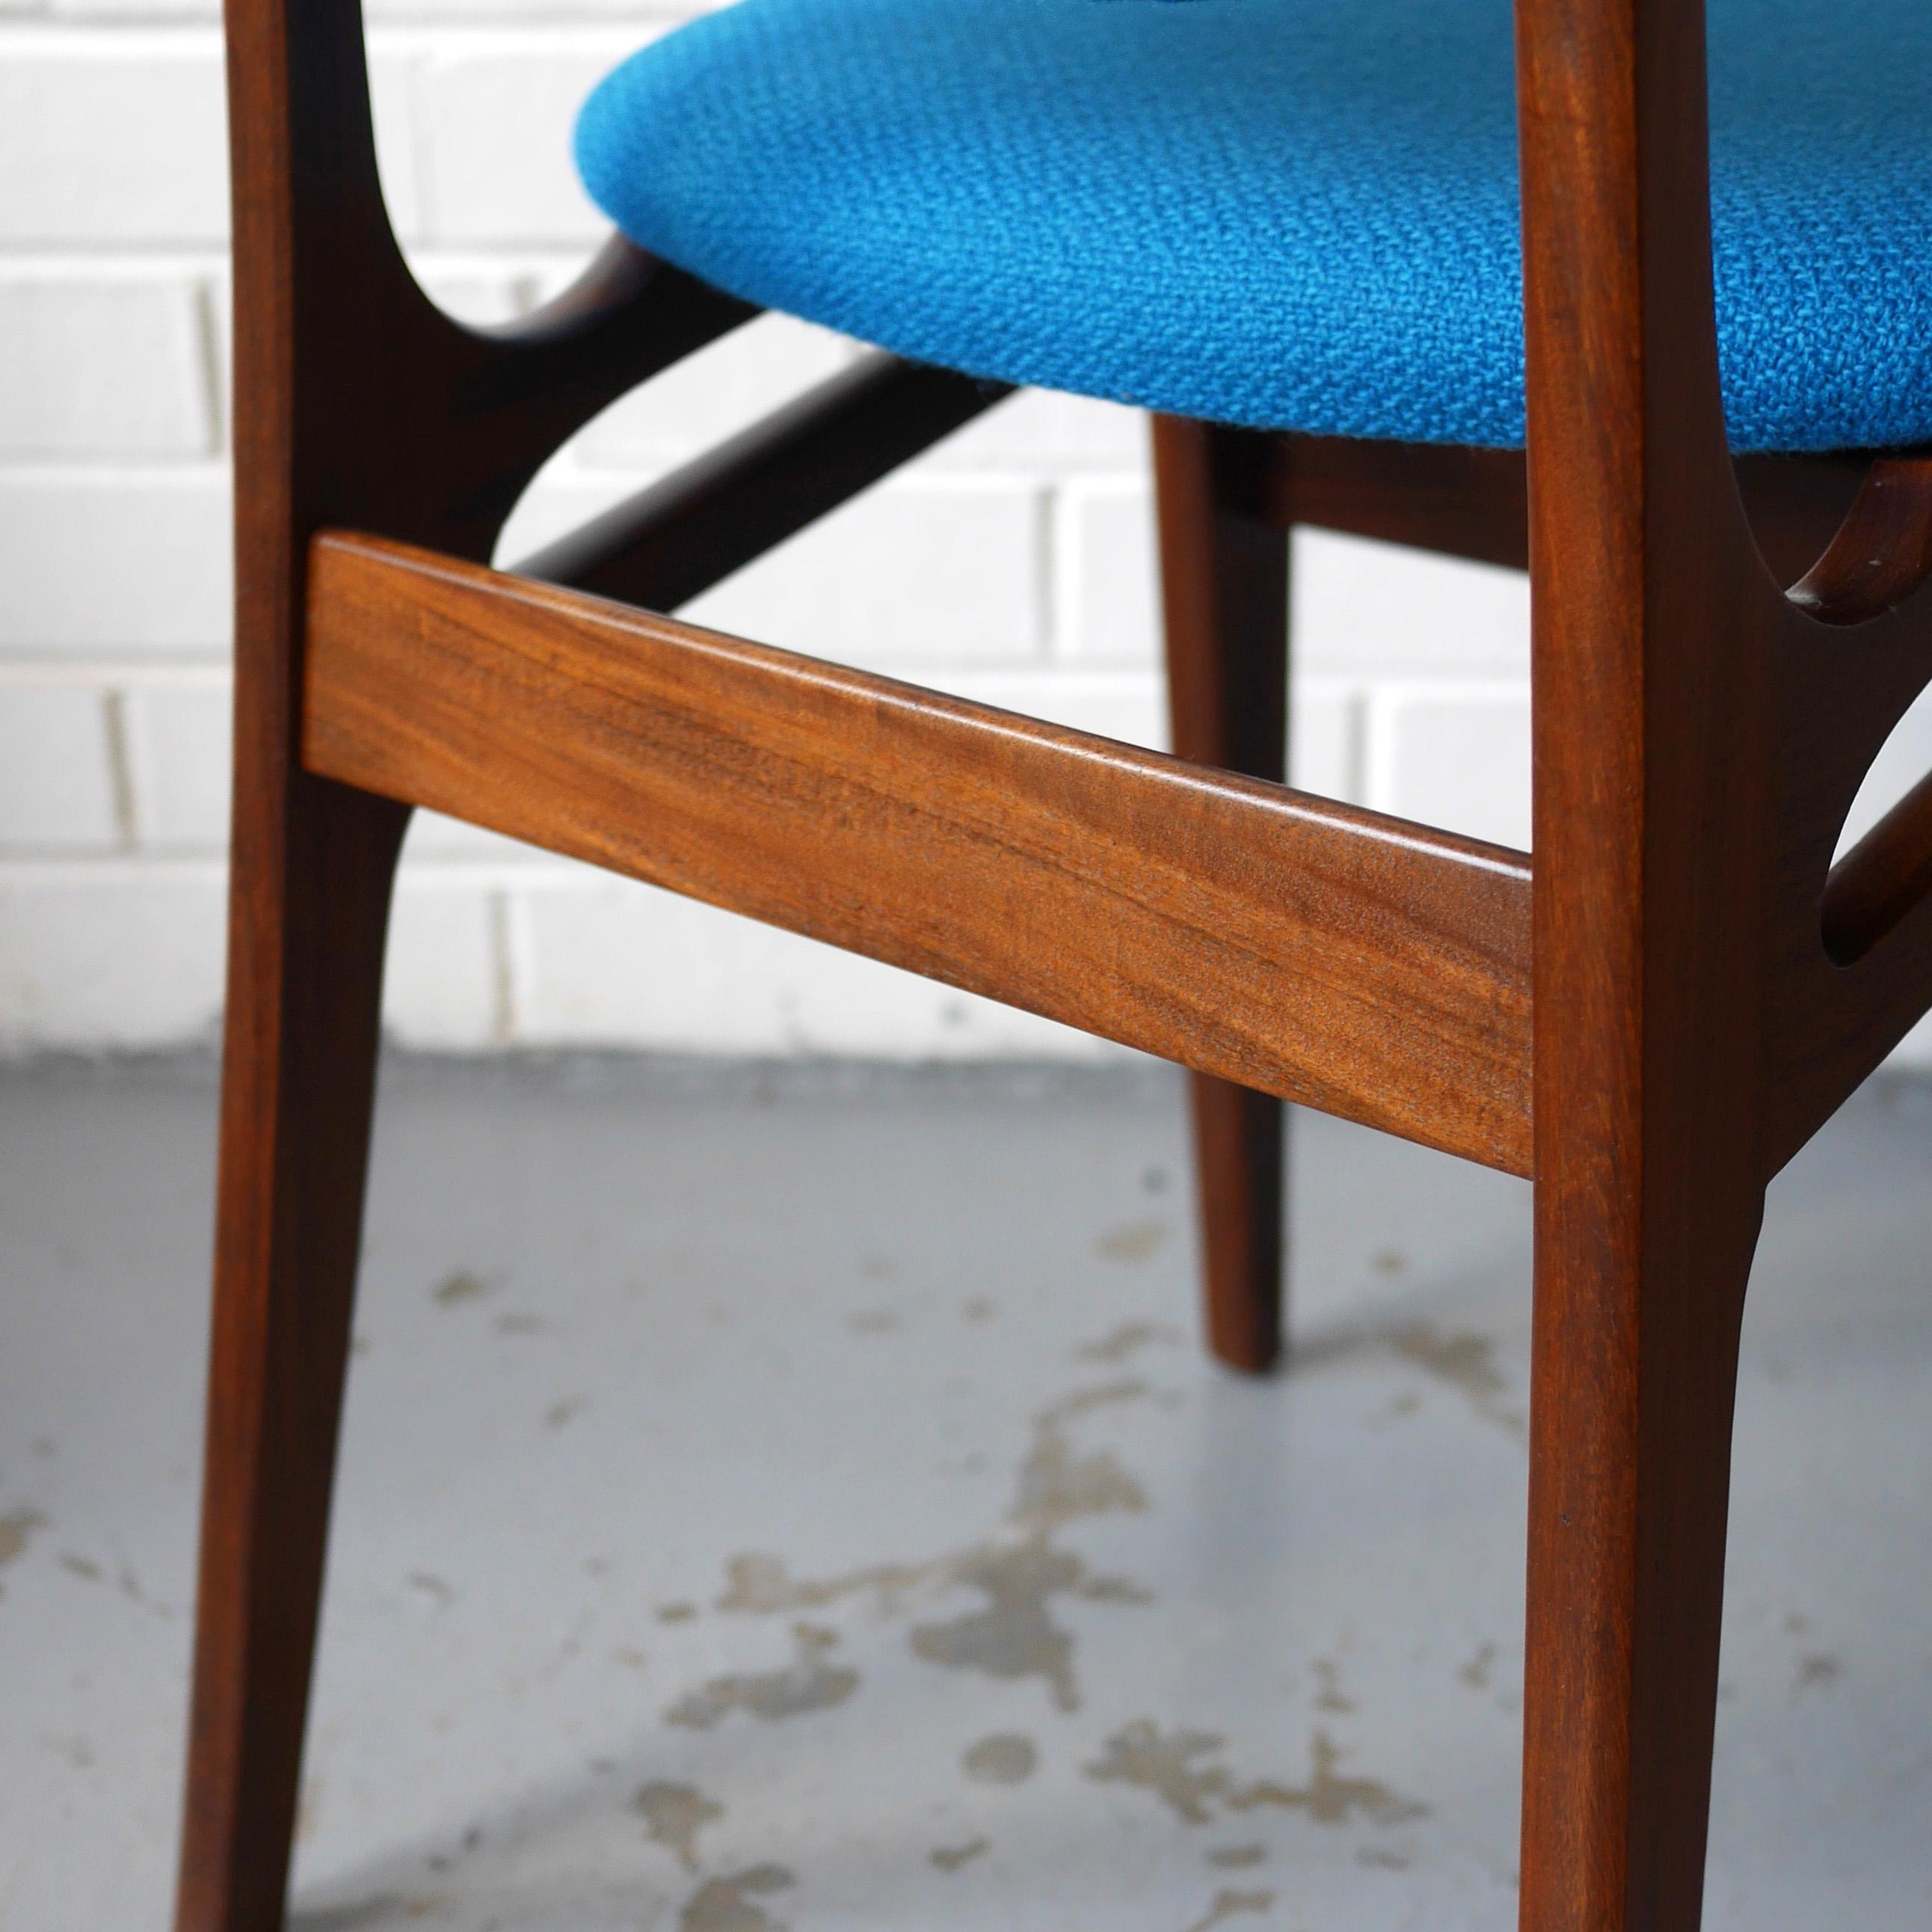 Set of Four Solid Afrormosia Dining Chairs with Blue Wool Upholstery, circa 1961 For Sale 5